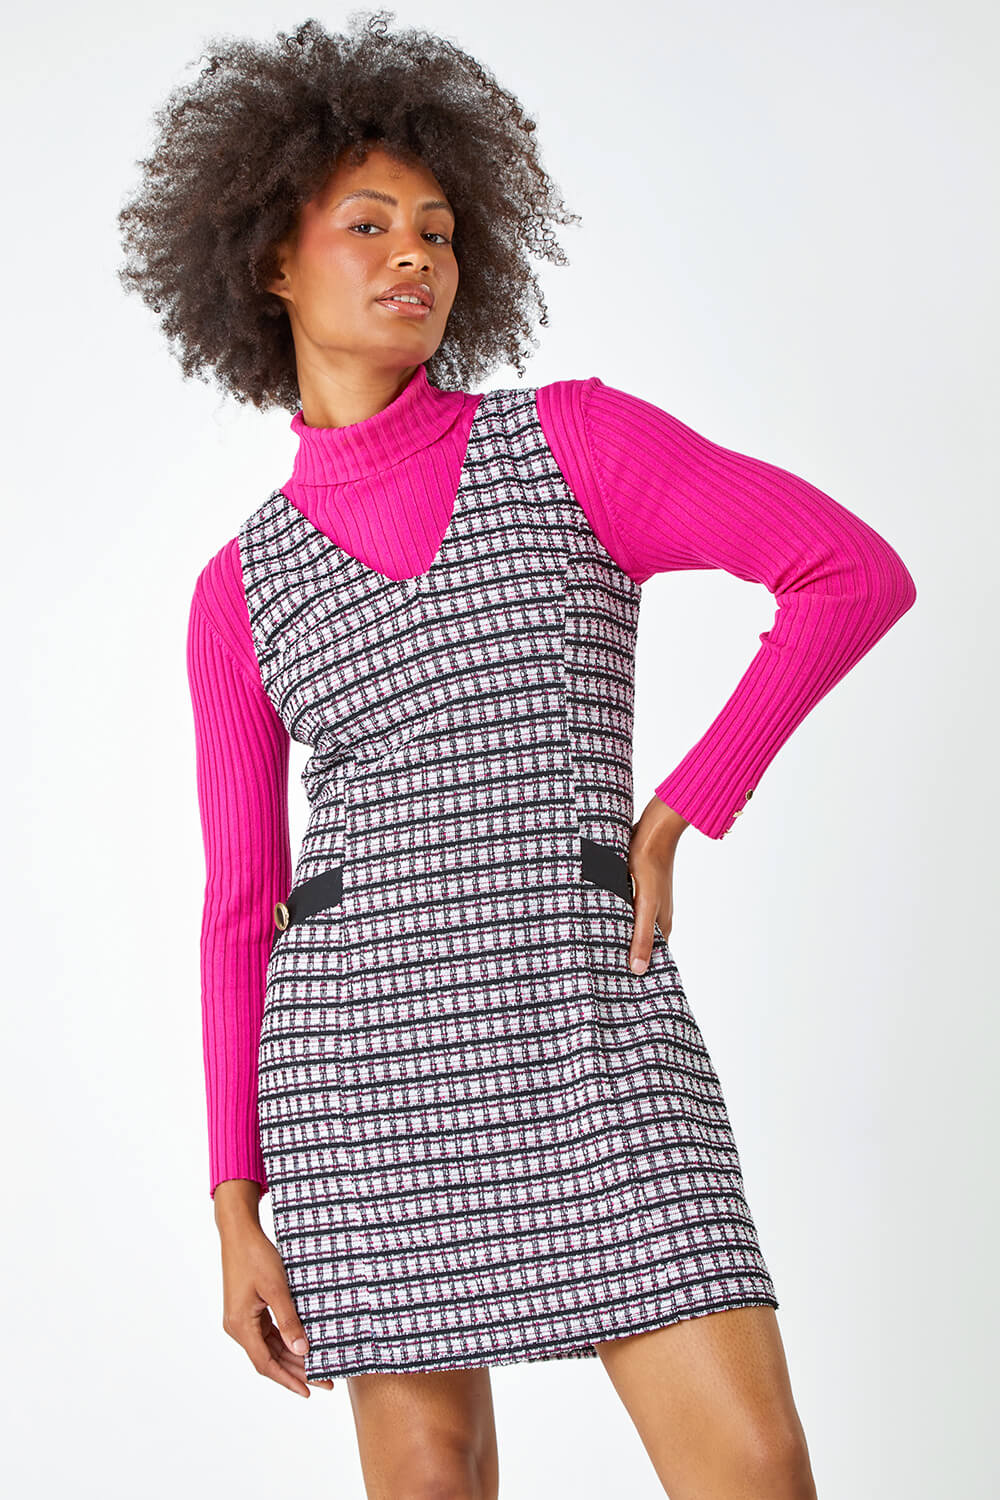 PINK Sleeveless Houndstooth Stretch Dress, Image 2 of 5